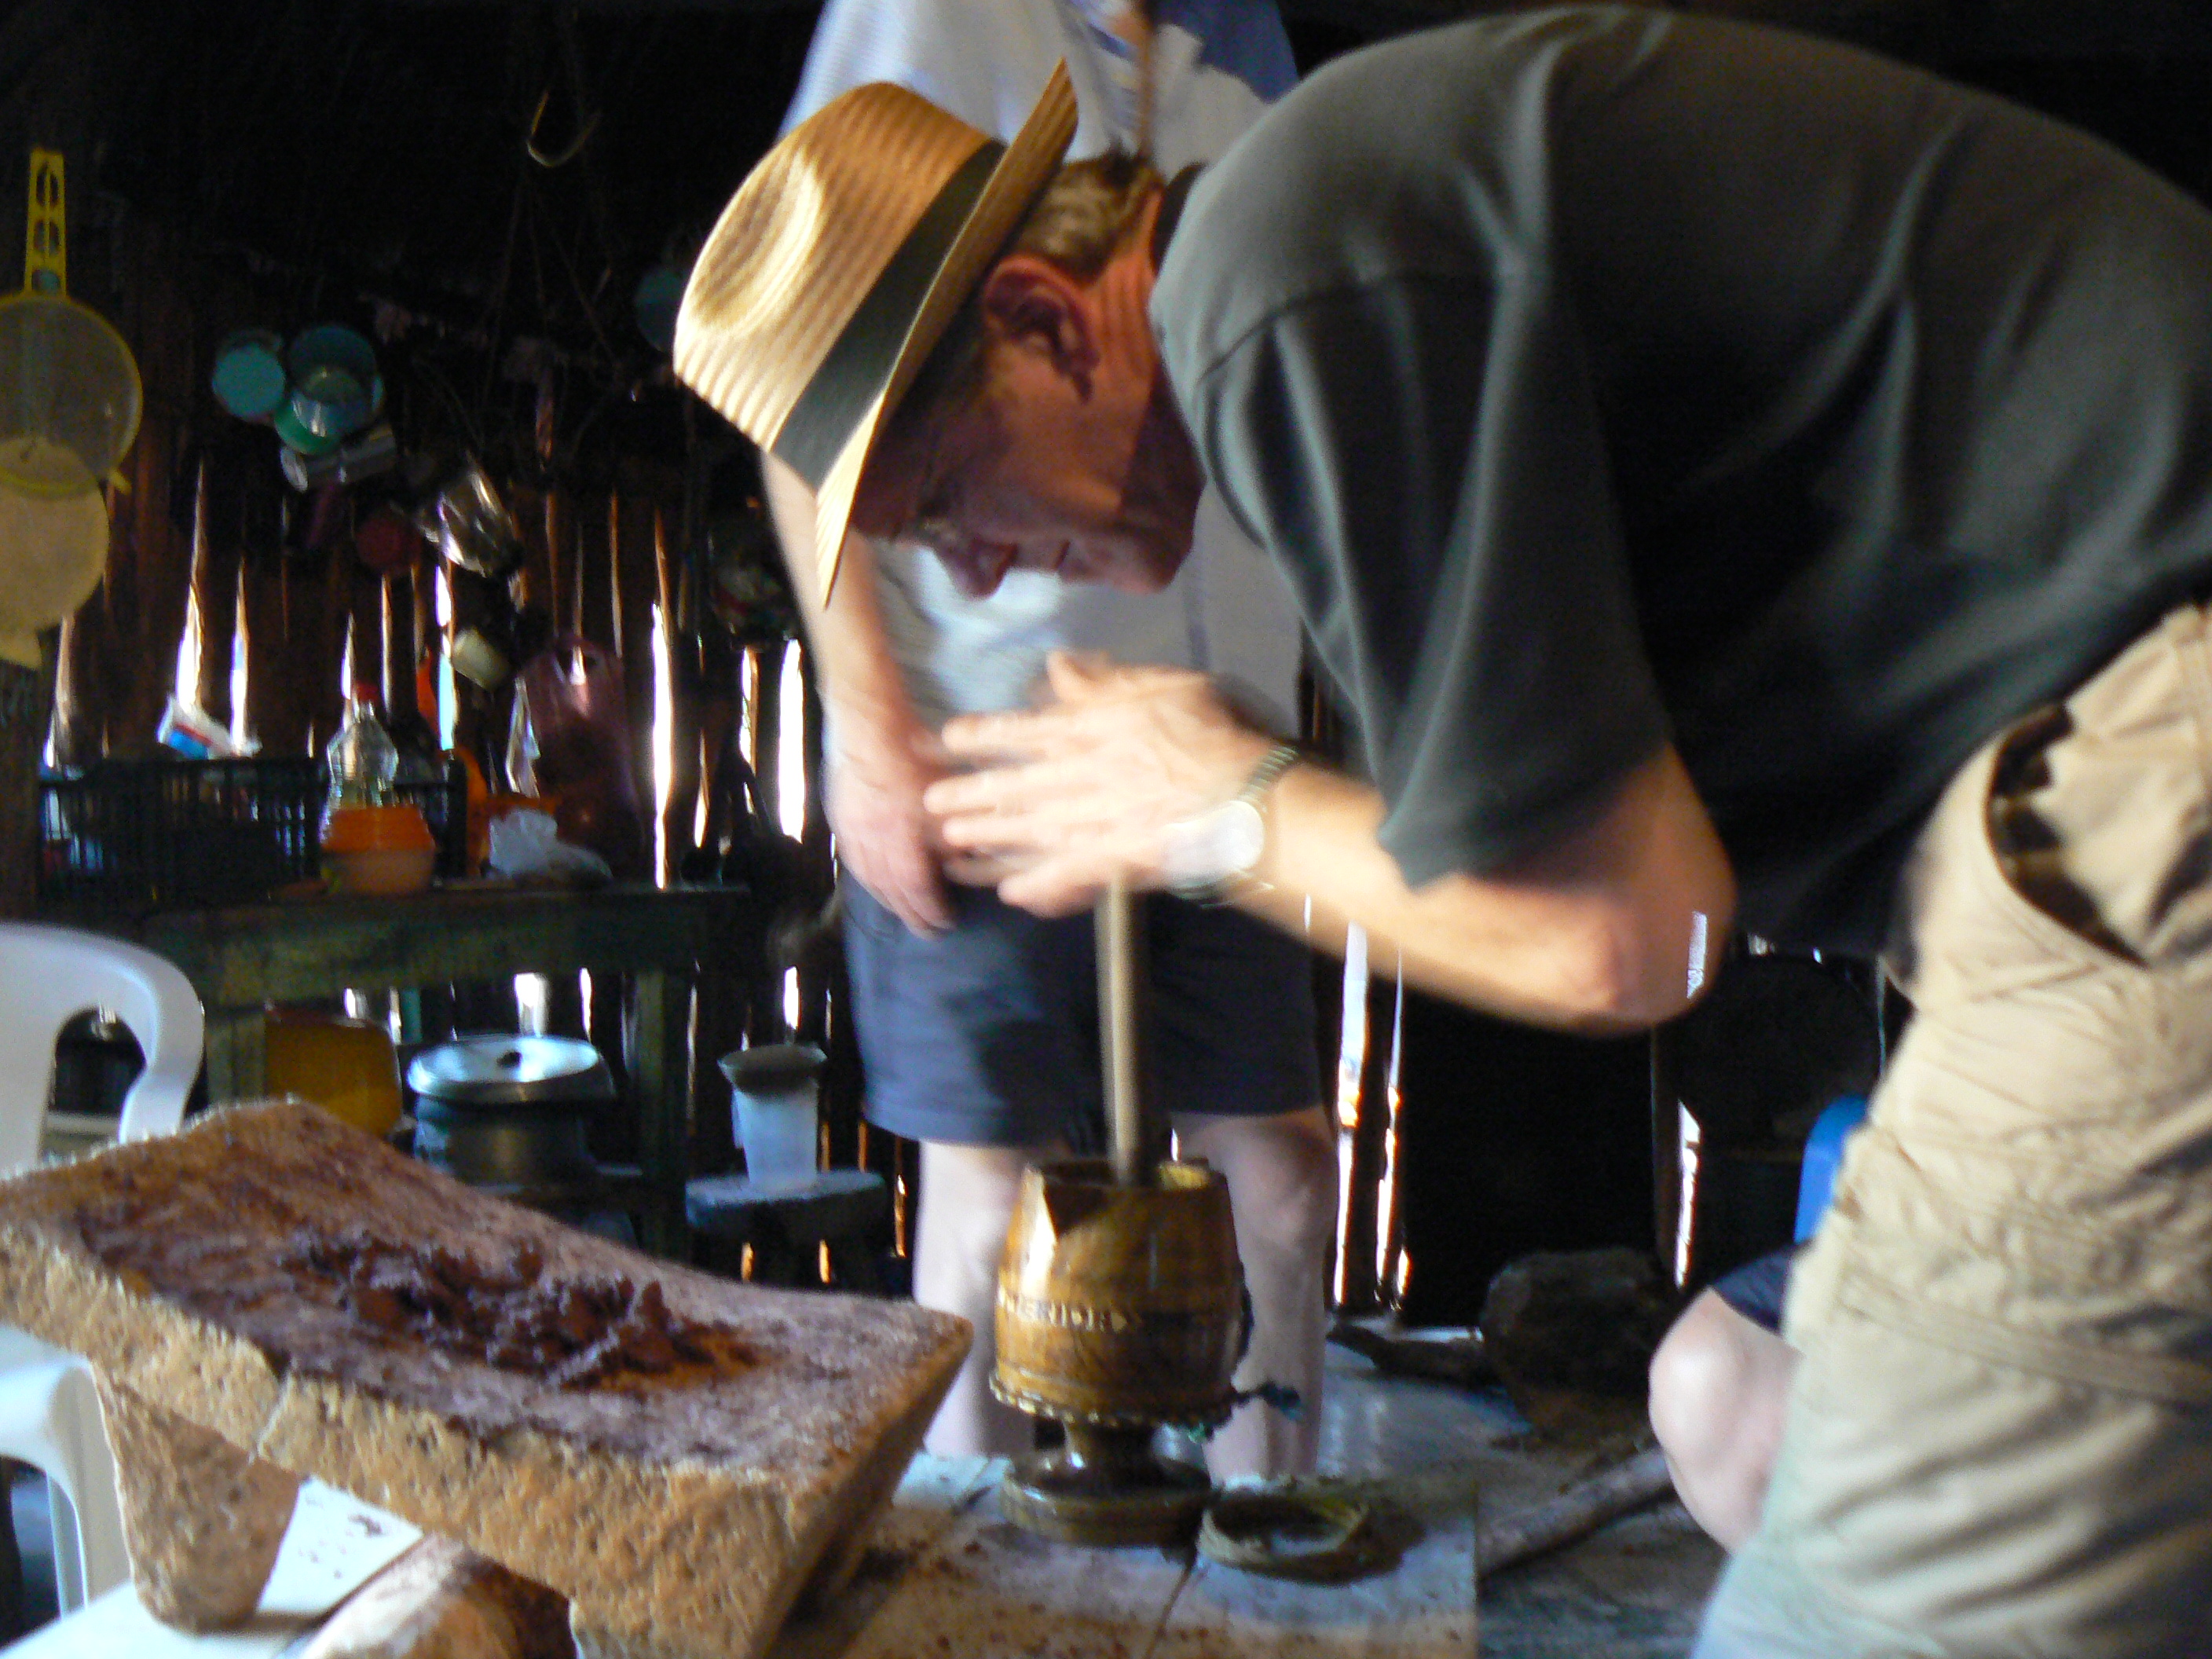 making cocoa in the tradtional Mayan way.